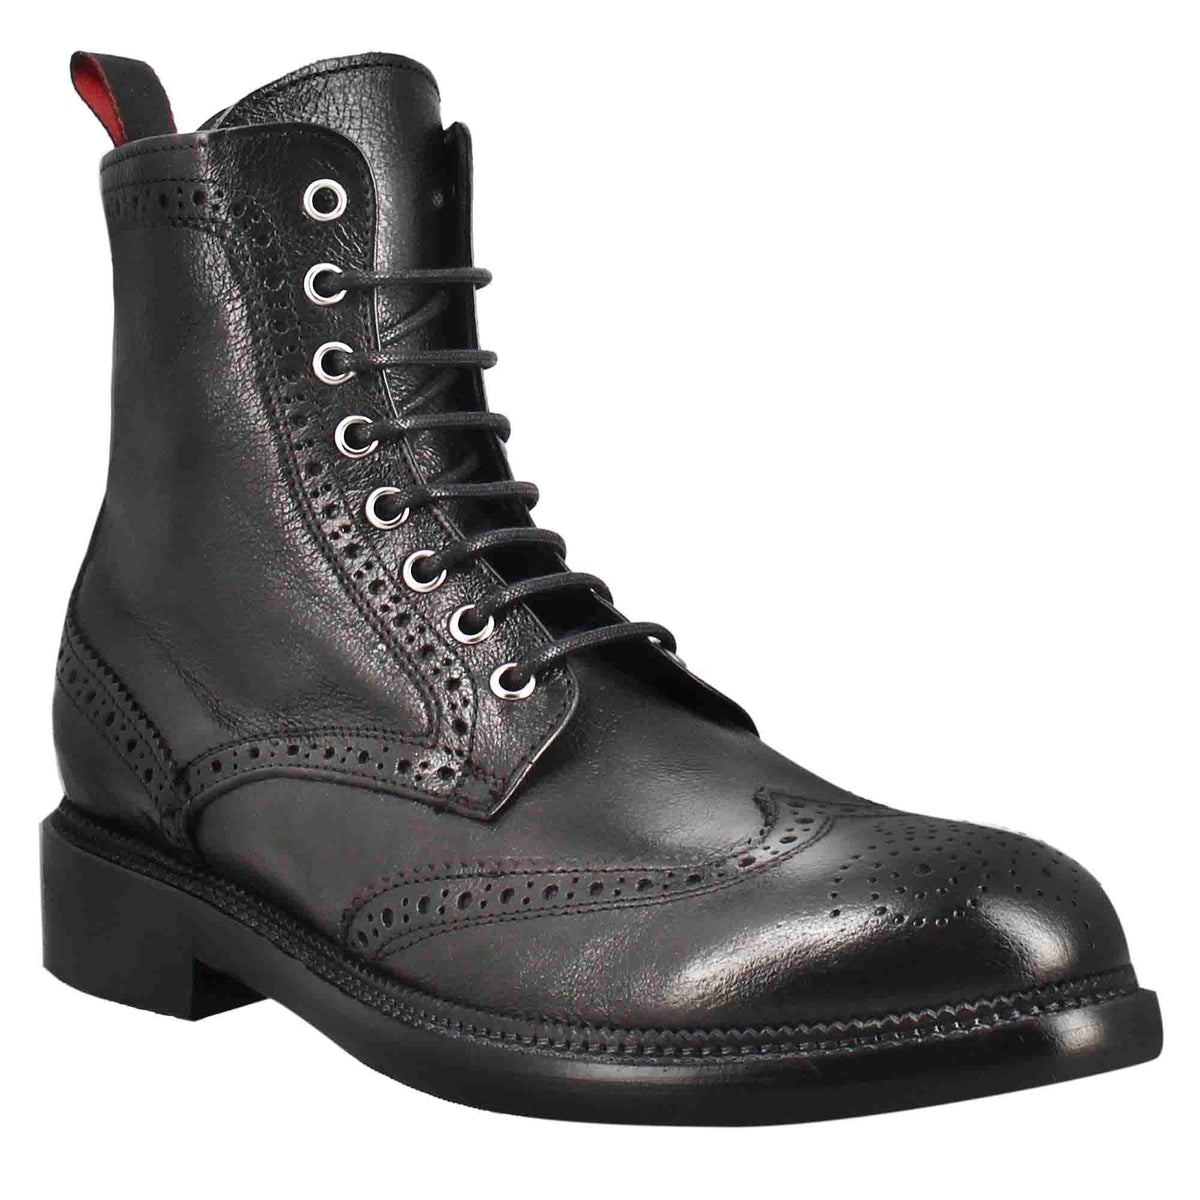 Candy amphibians for men in black washed leather